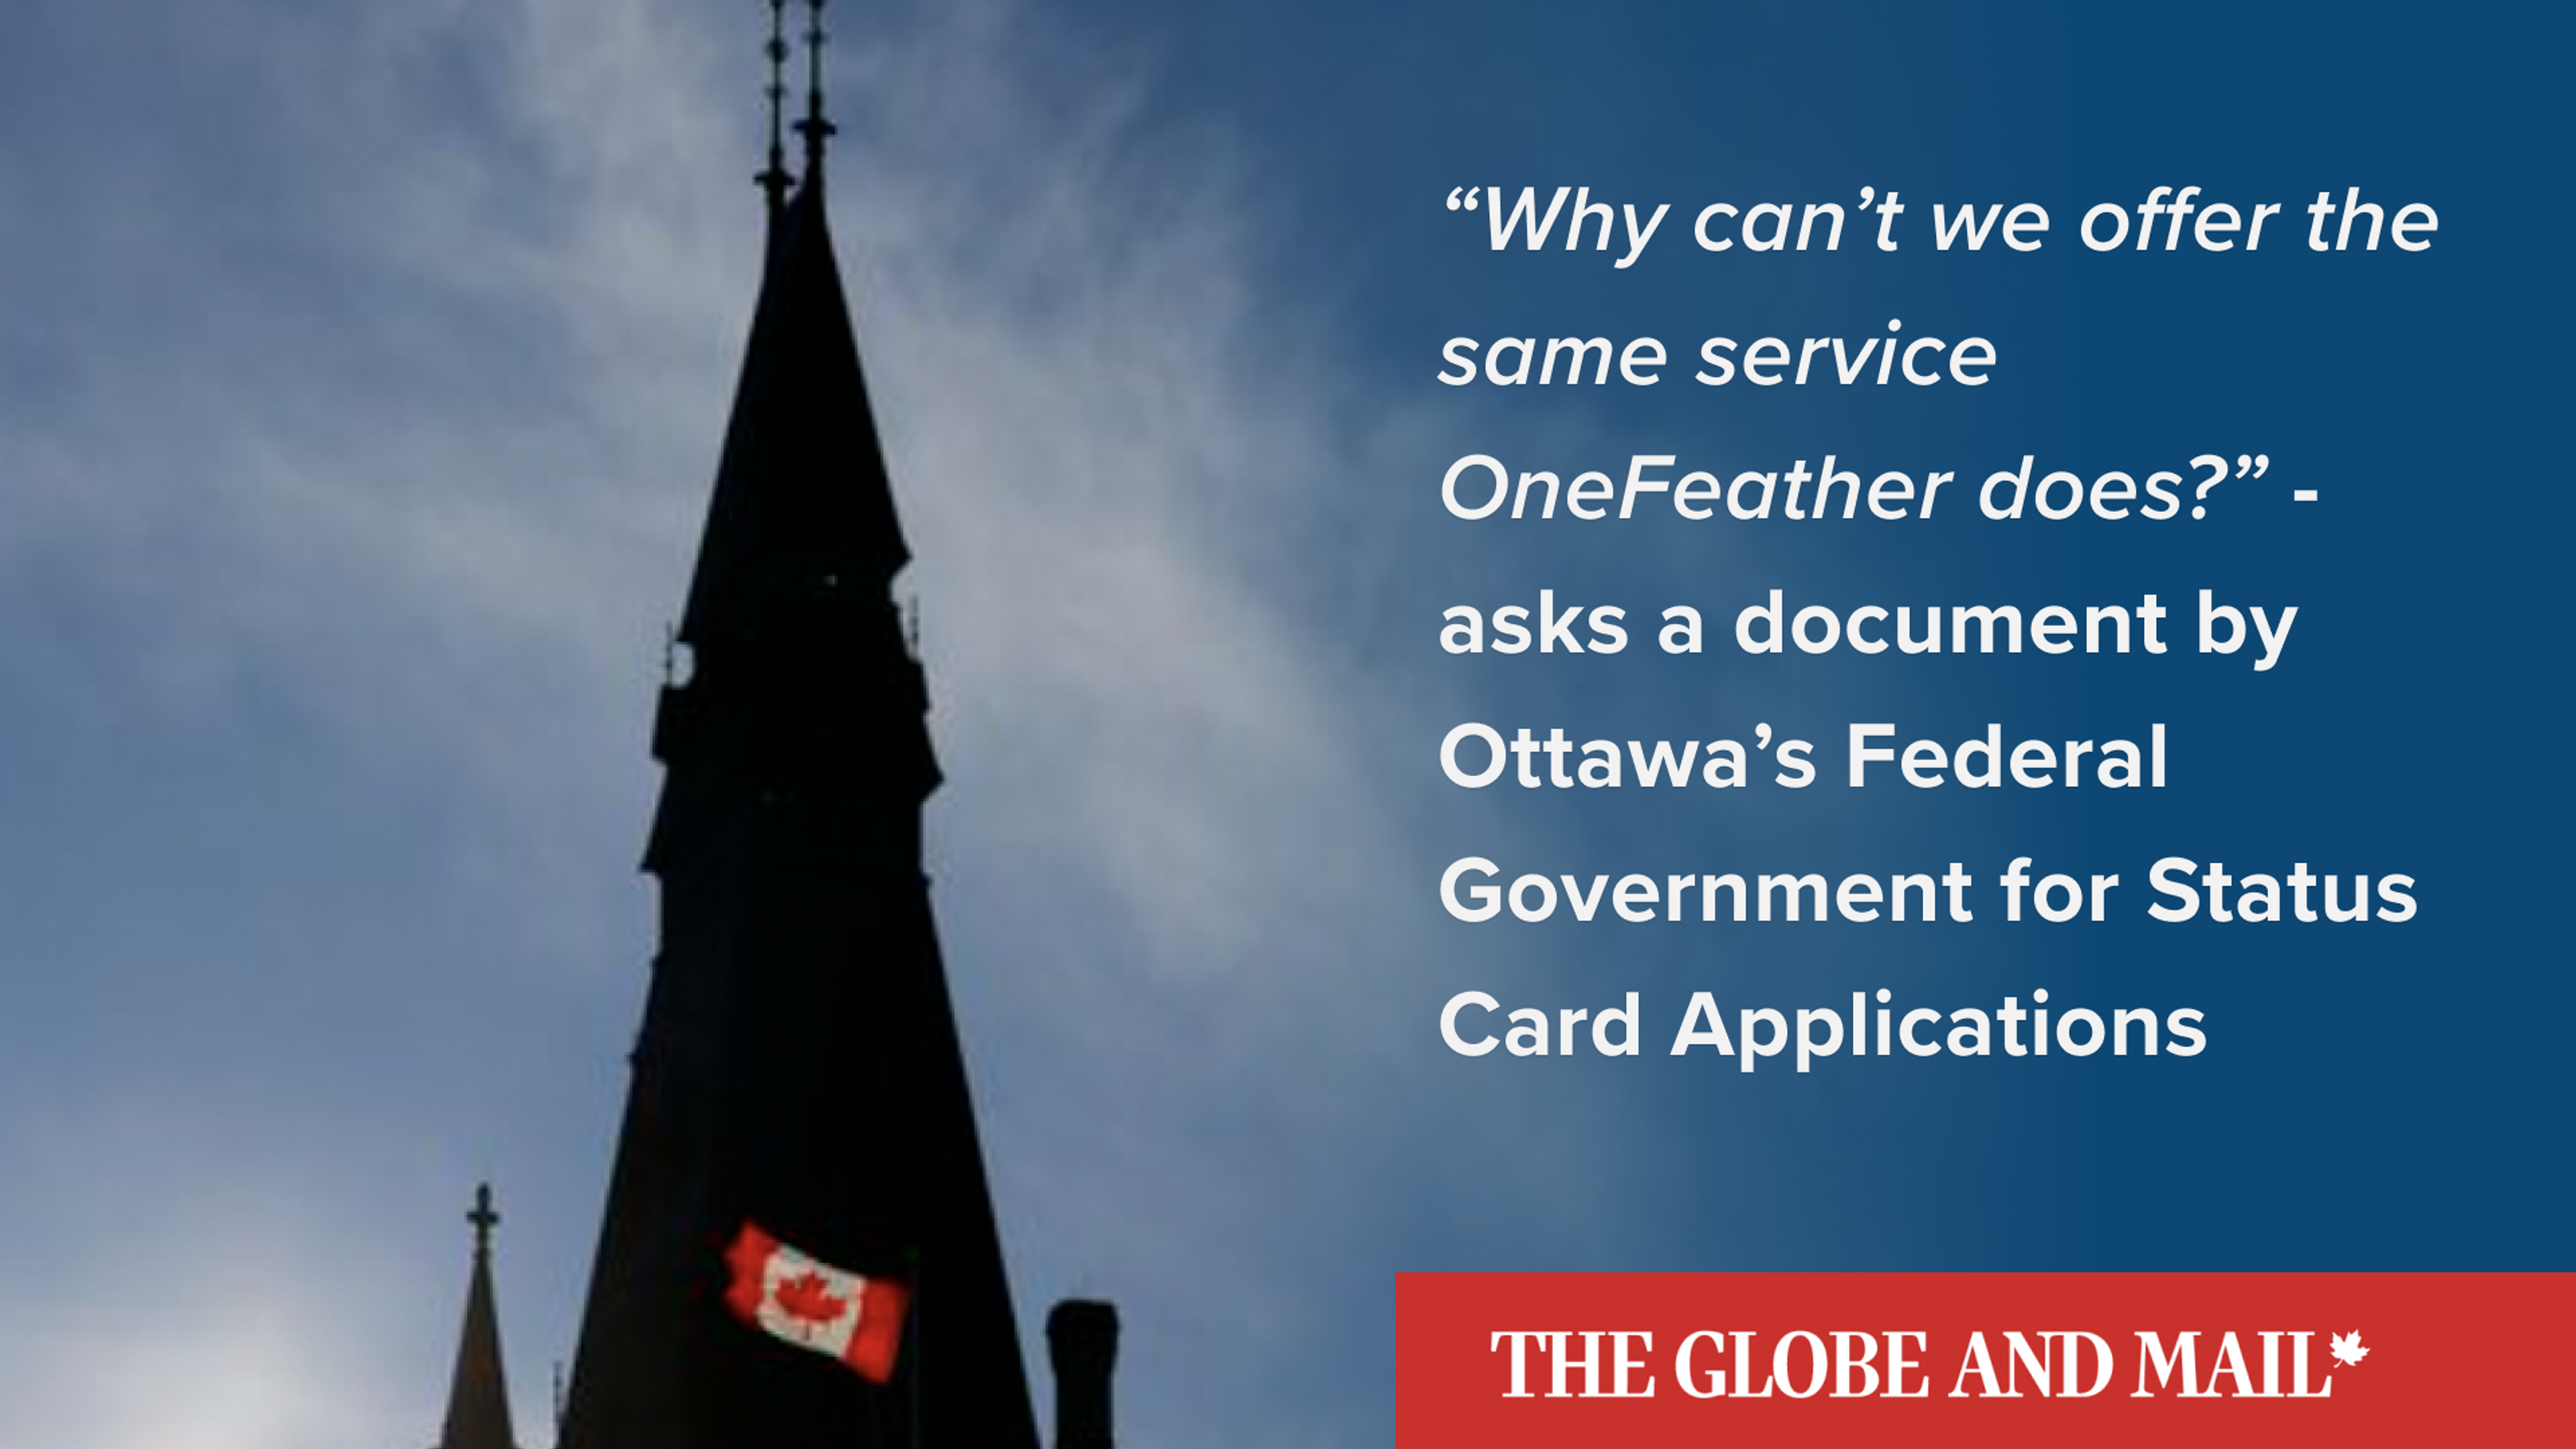 The Globe and Mail report features government memos citing OneFeather's online solution for status card applications